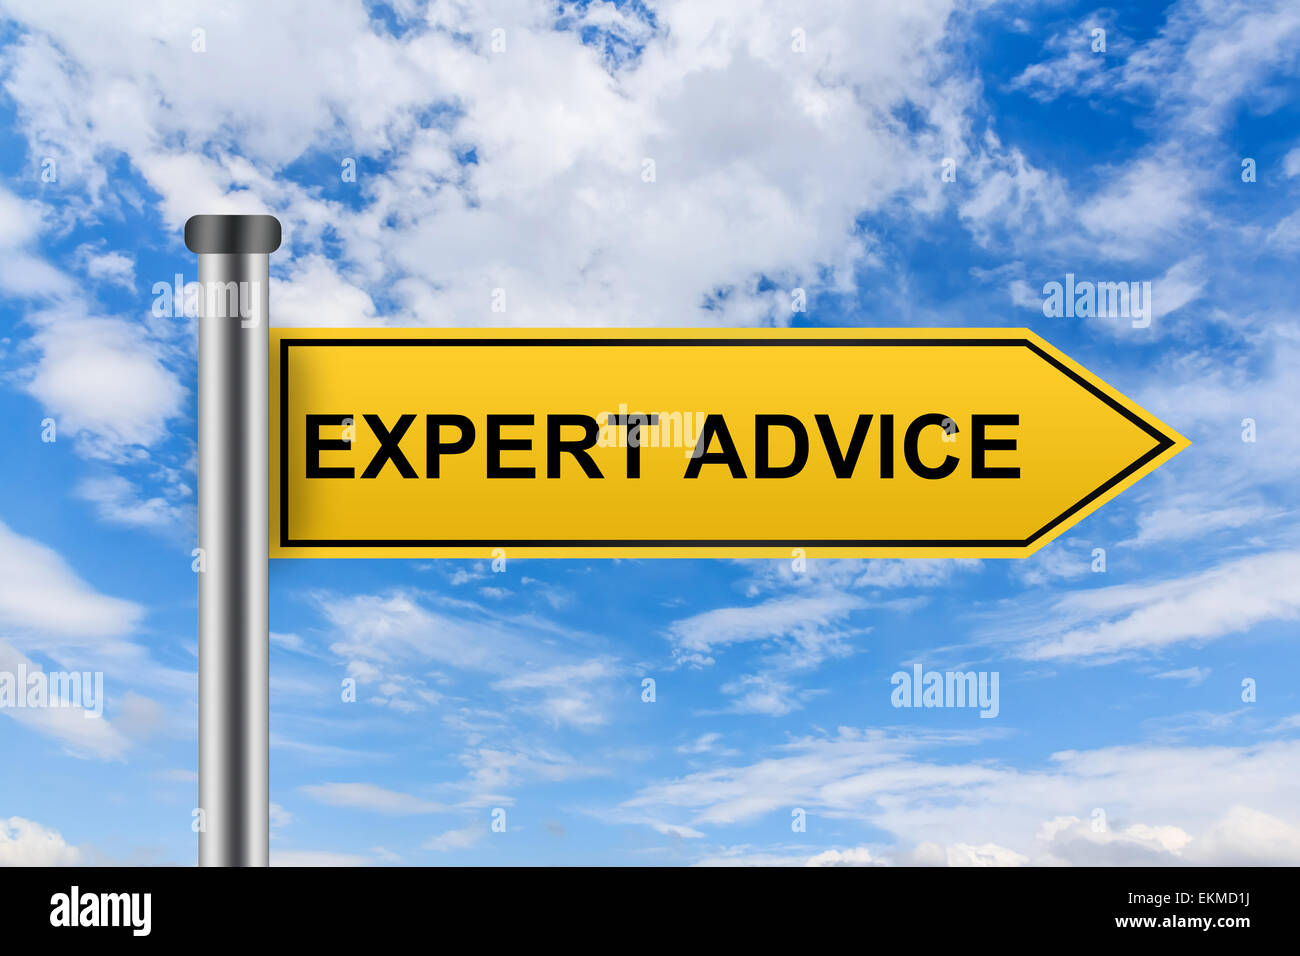 expert advice words on yellow road sign on blue sky Stock Photo